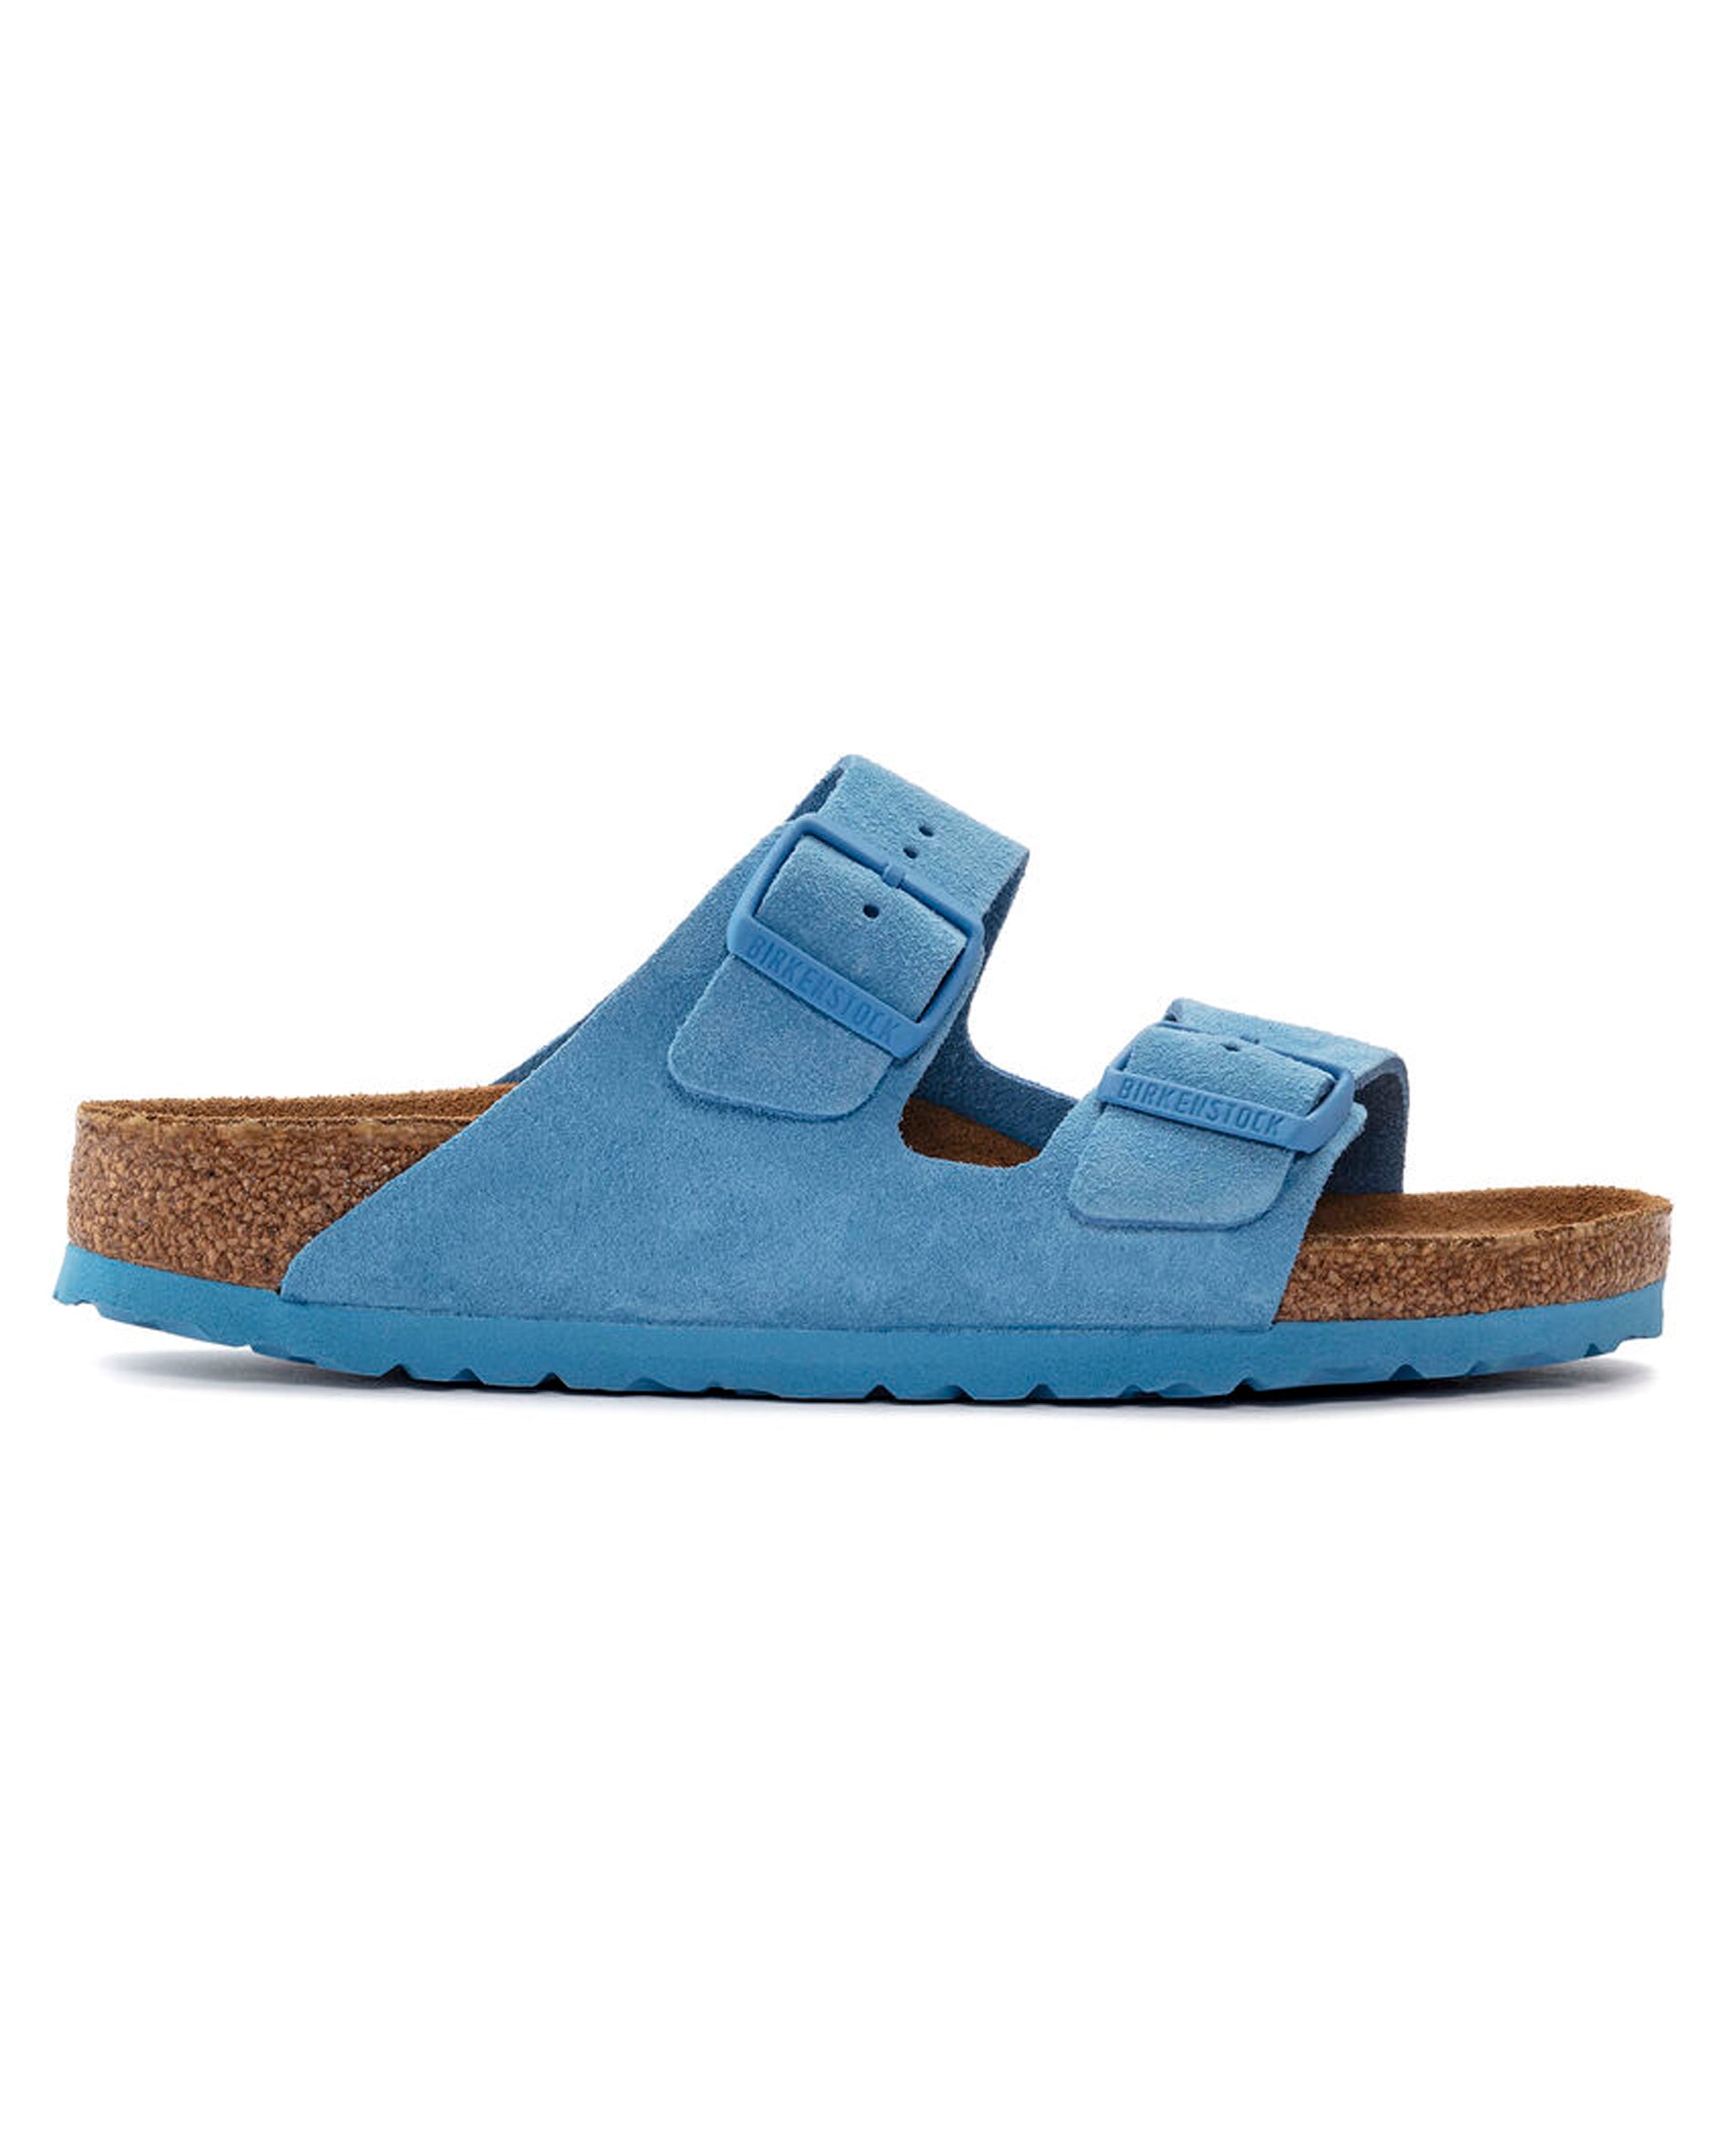 Arizona Soft Footbed Sky Blue Suede Leather Sandals